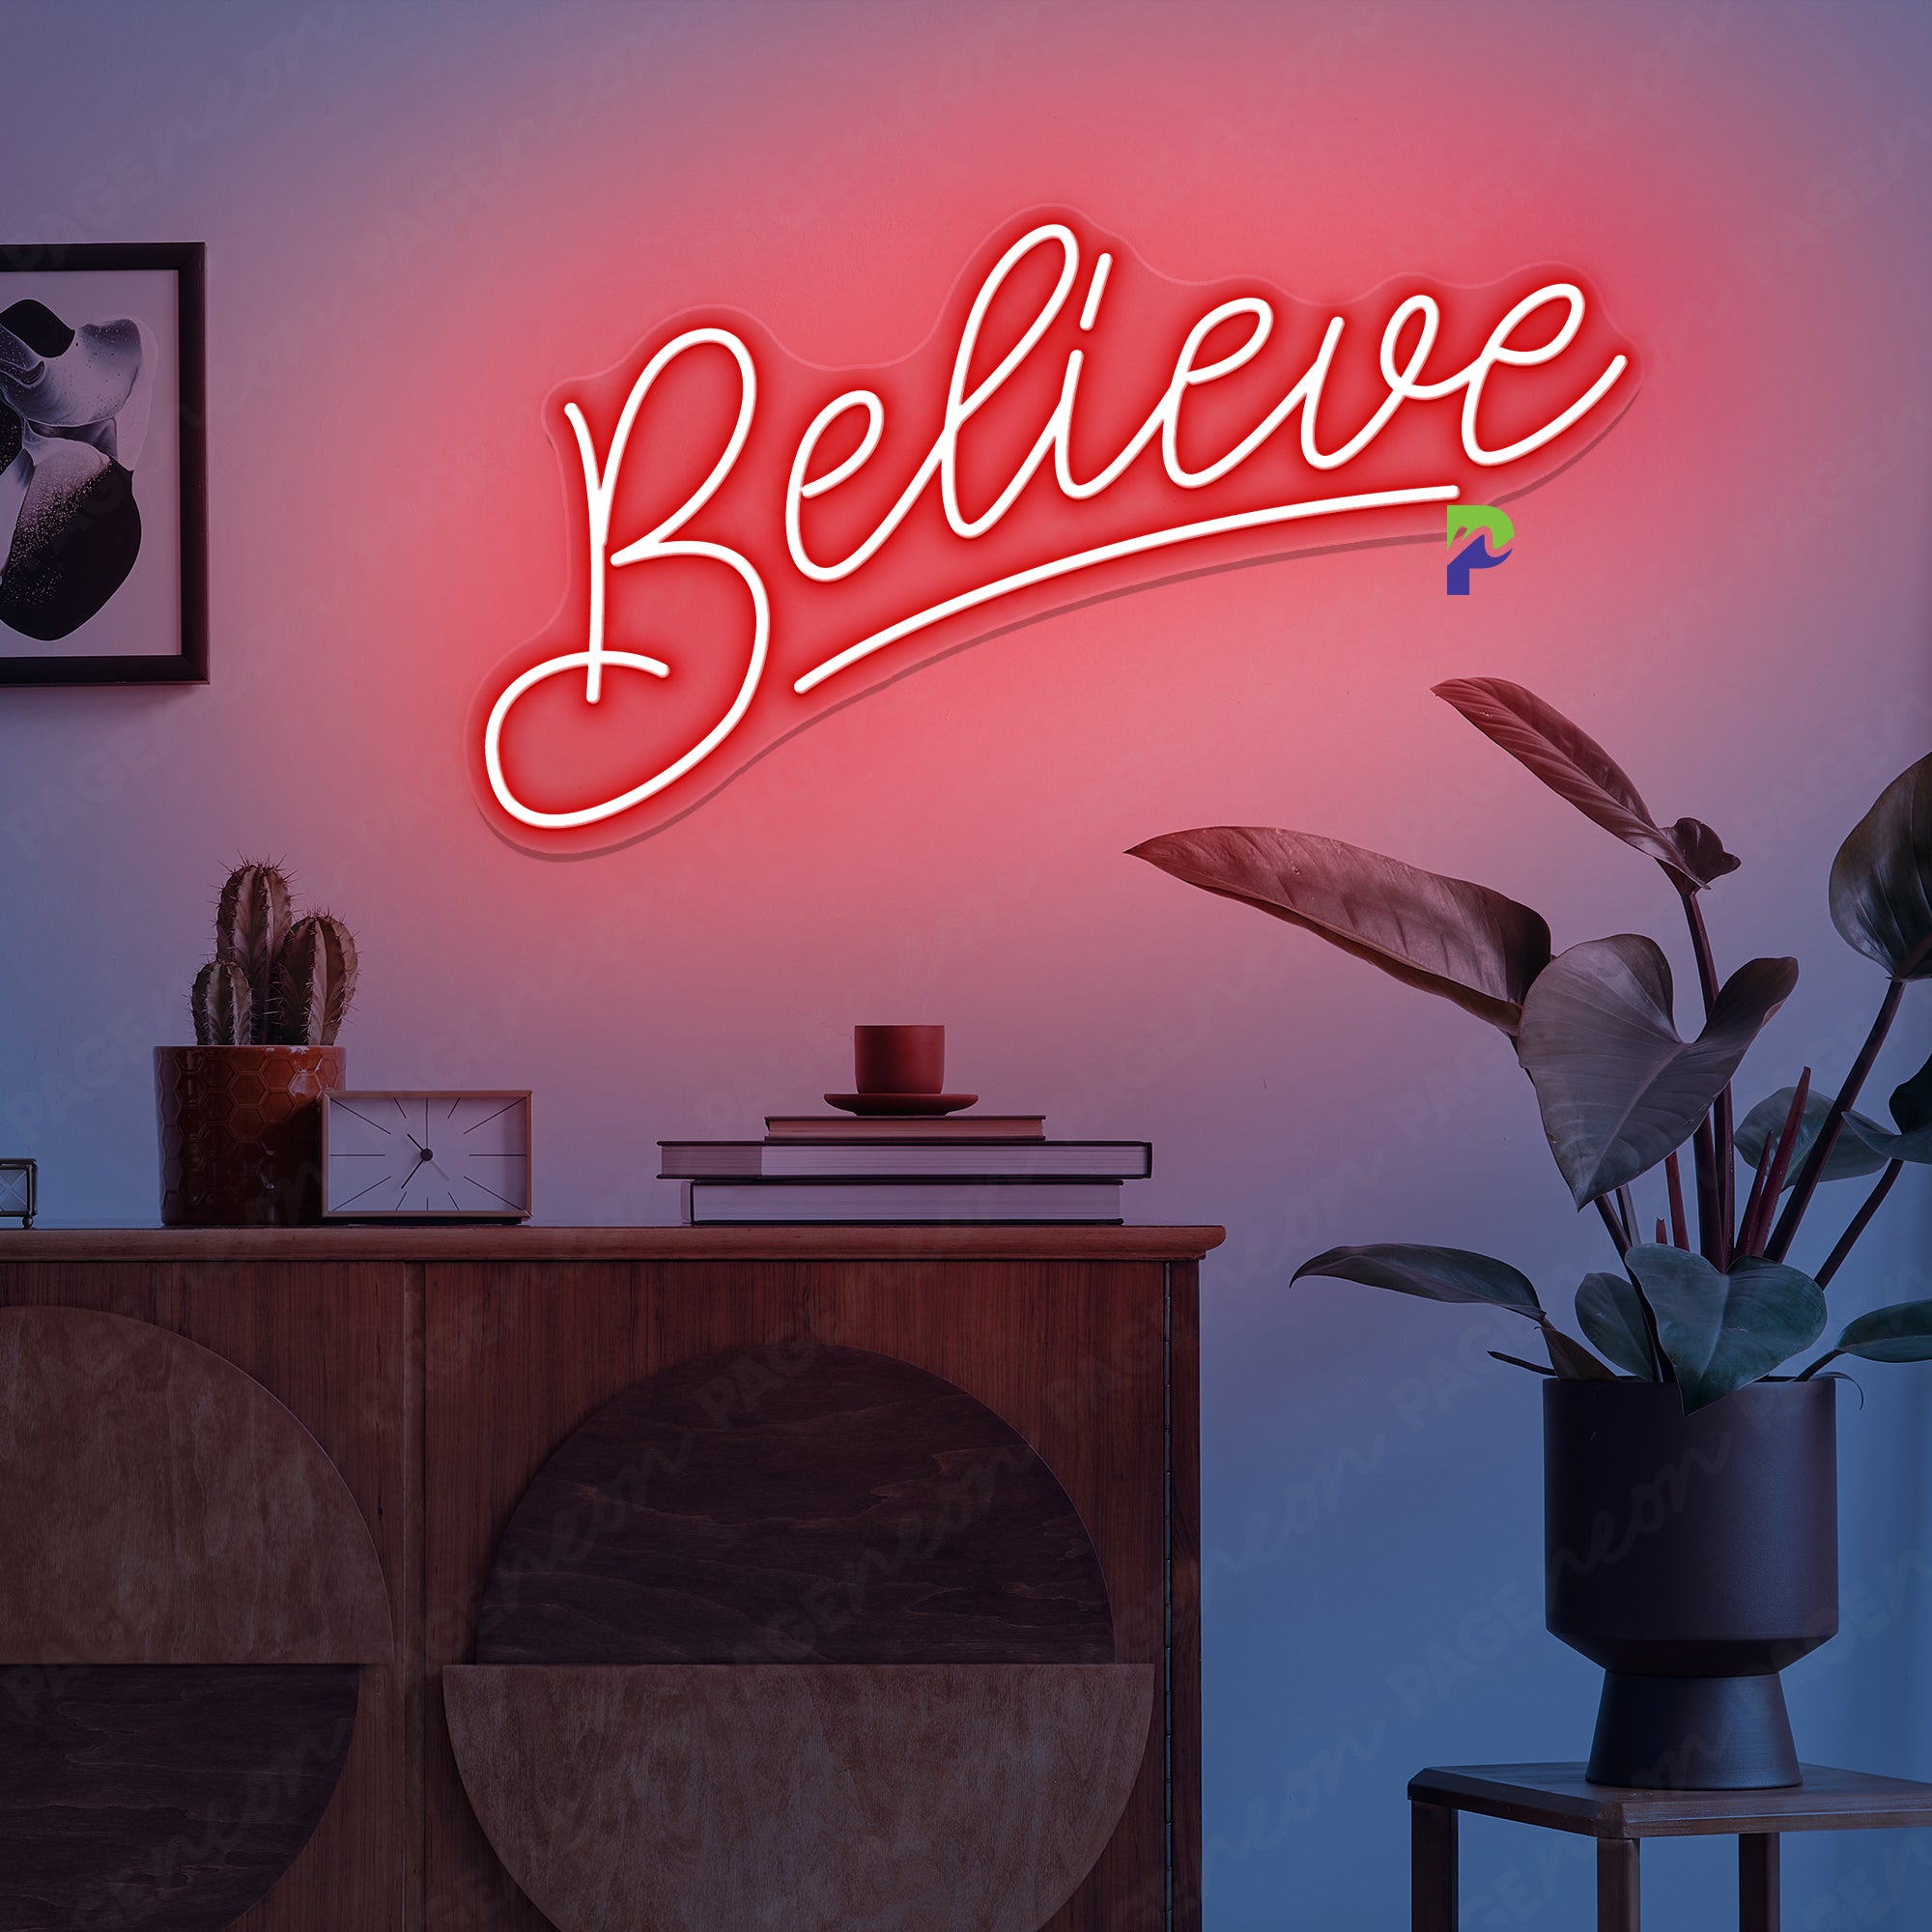 Believe Neon Sign Simple Inspirational Word Led Light